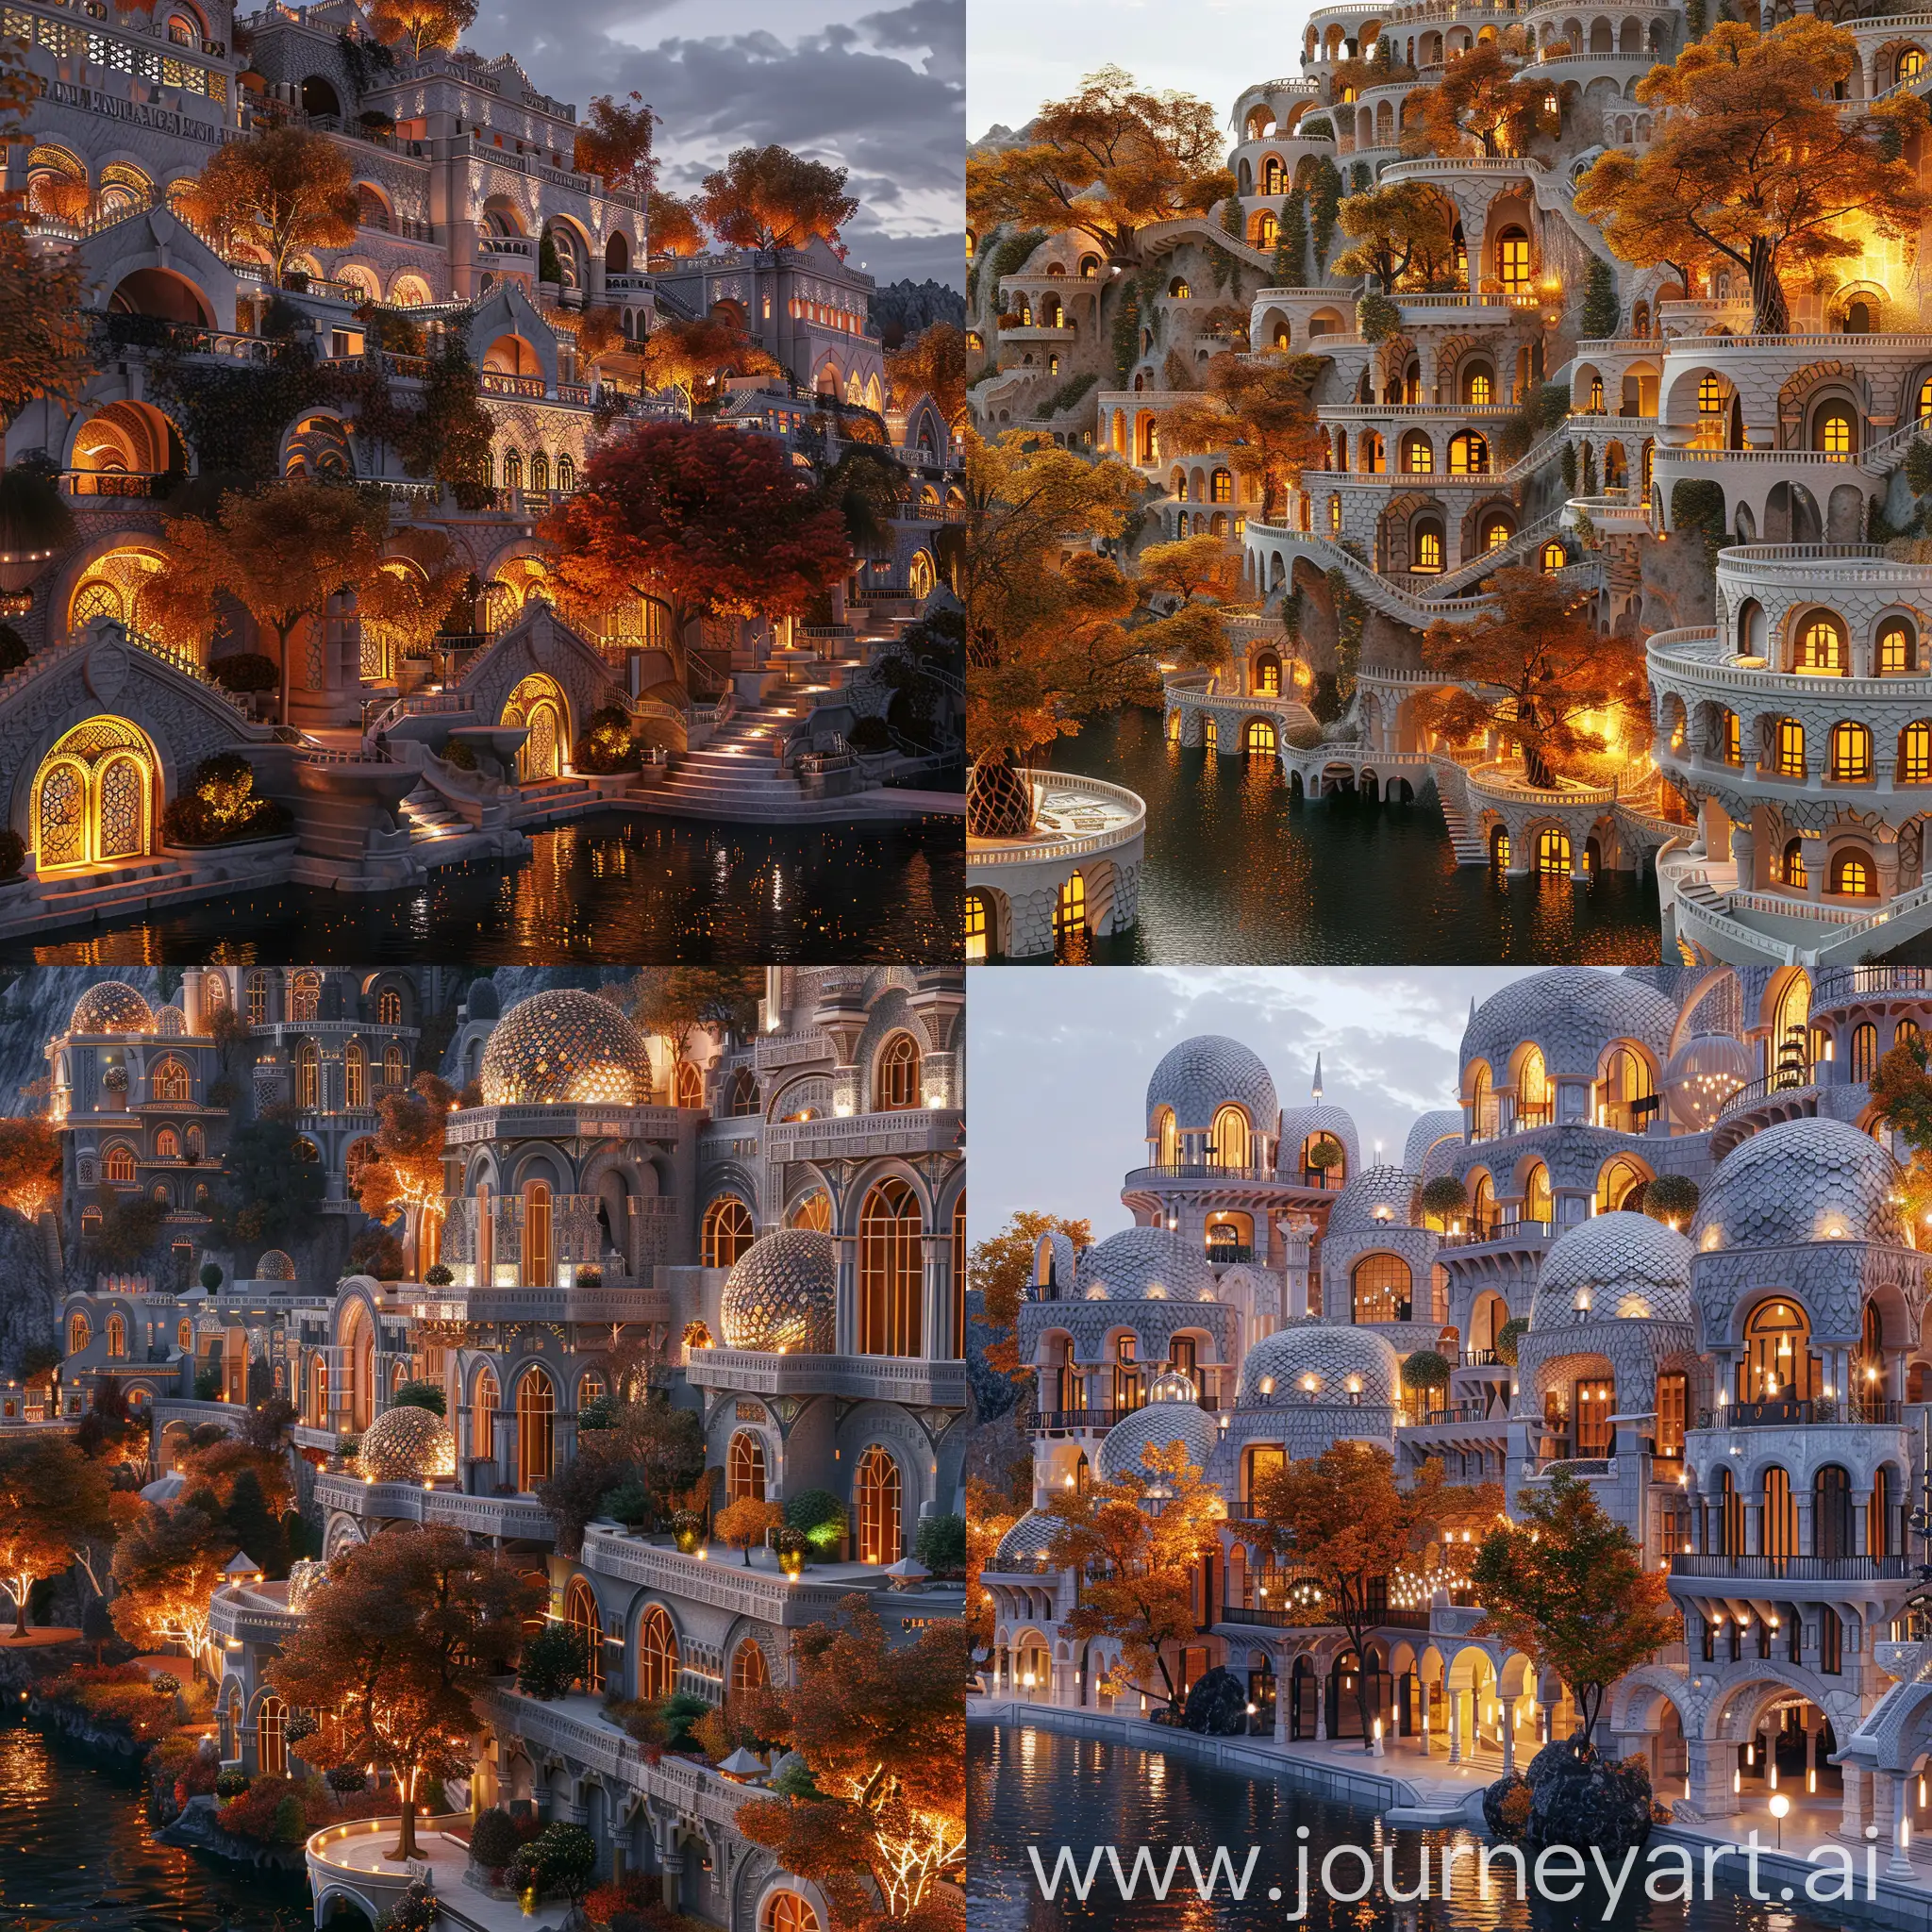 Beautiful futuristic Aluma City in an alternate timeline where all buildings retain traditional elements, ornate travertine architecture with scale-like patterns on facades and illuminated trees, monumental terraced buildings, canals, autumn, photograph